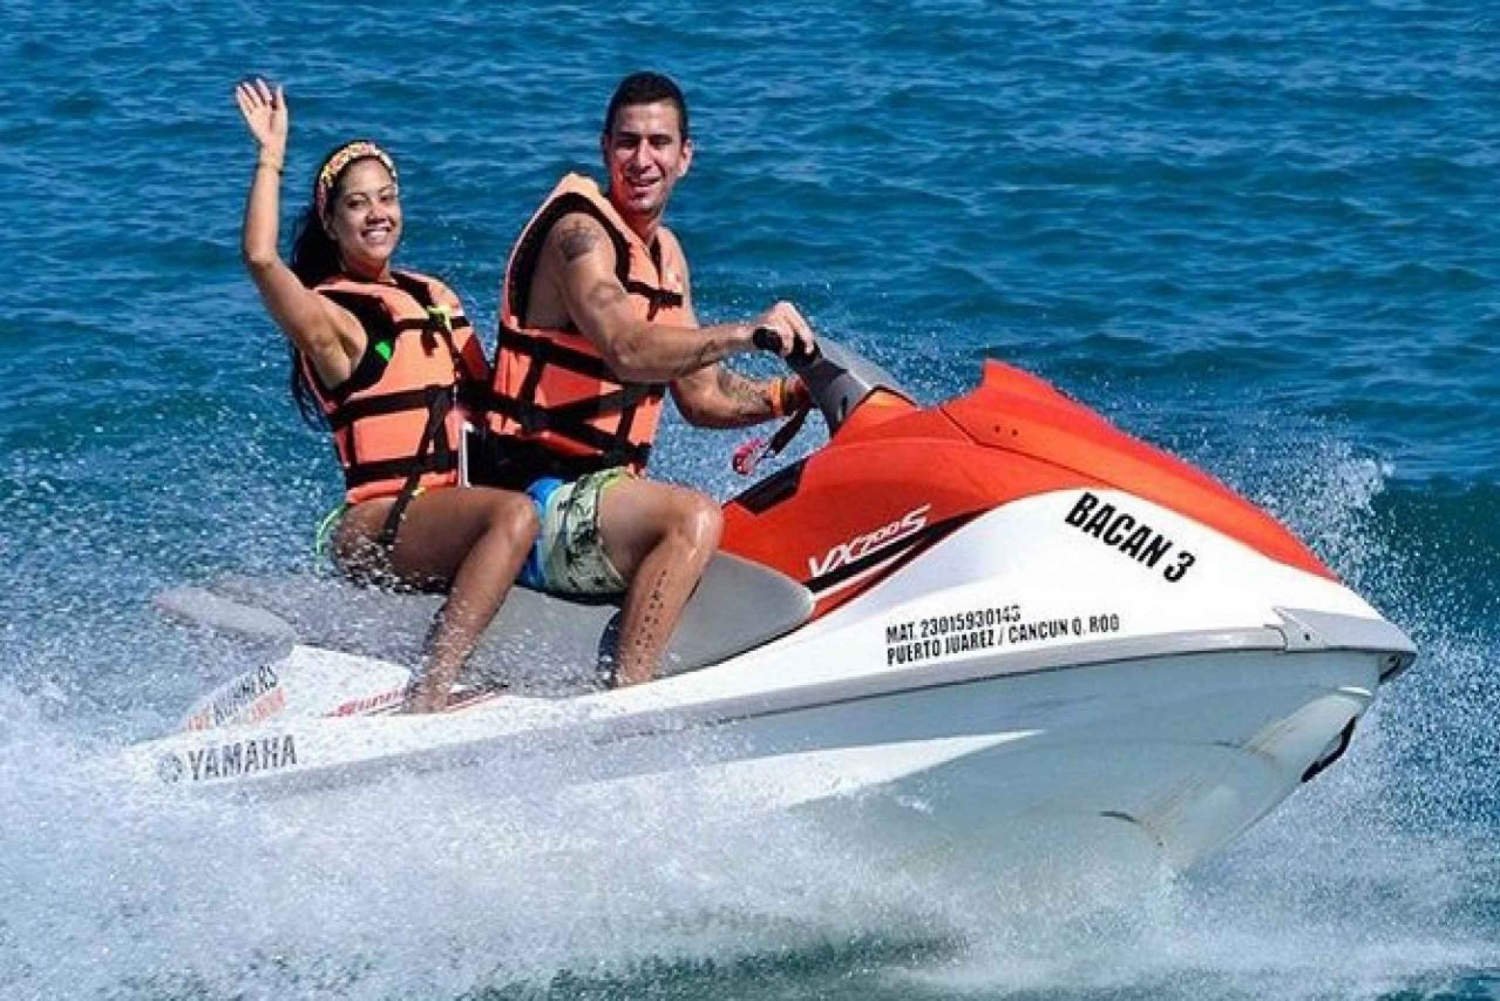 Cancun: Water Sports Combo Adventure with Transfer